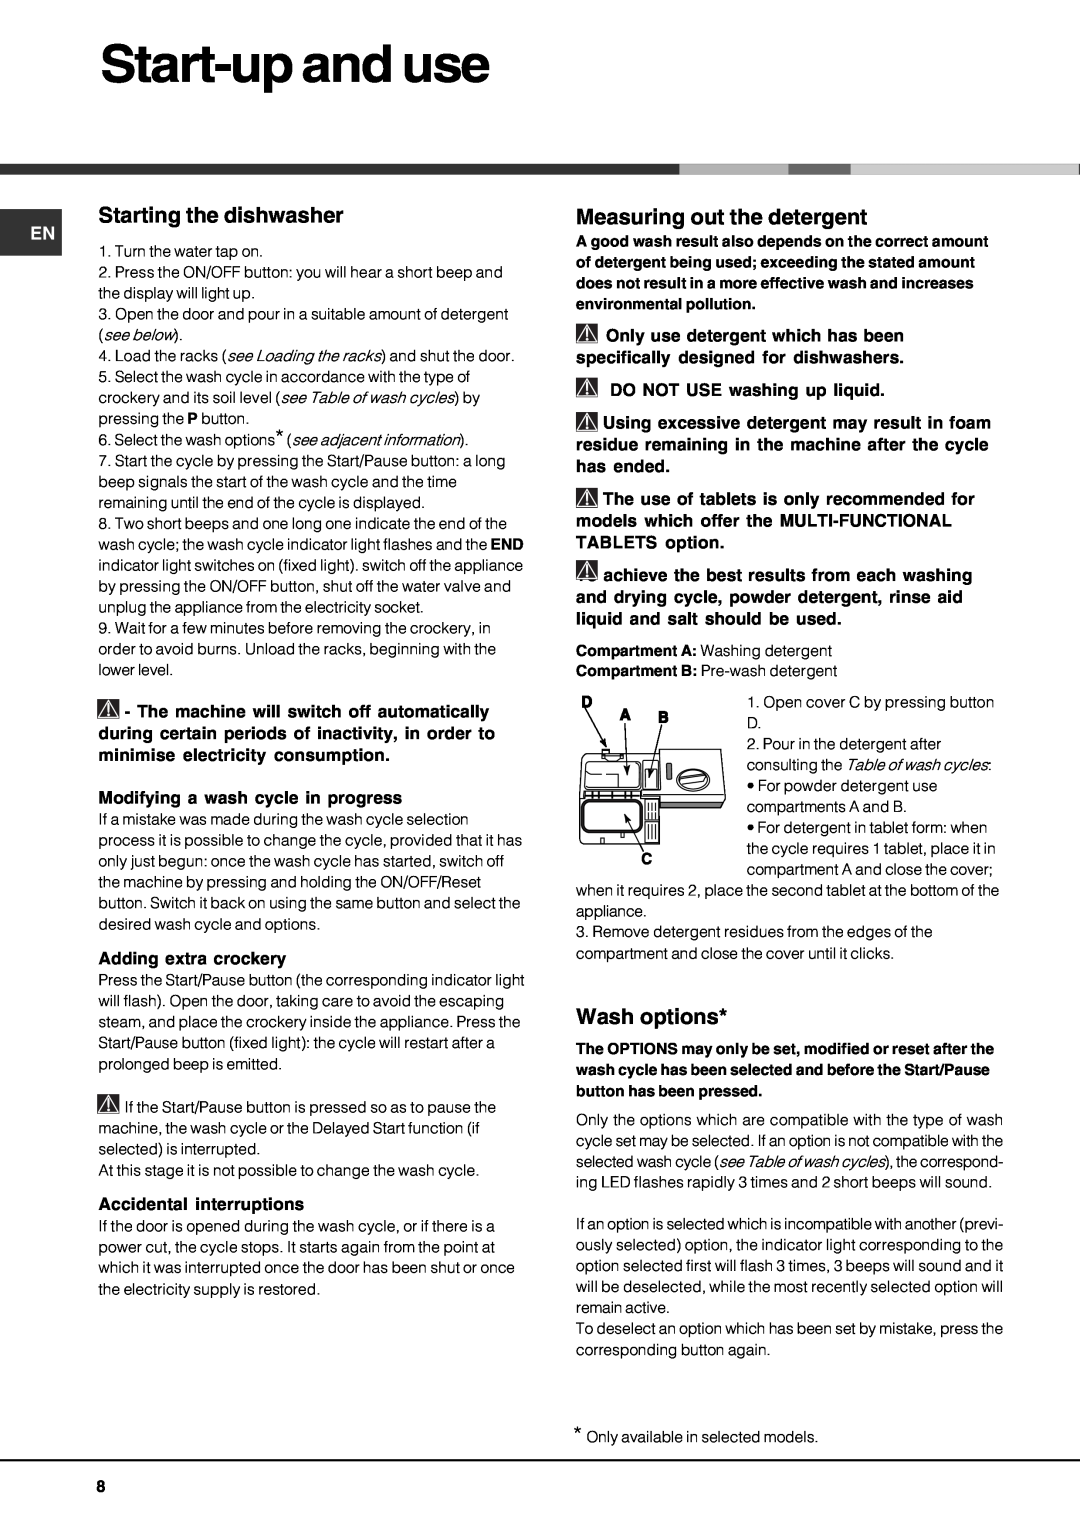 Hotpoint 1509)50-4 manual Start-upand use, Starting the dishwasher, Measuring out the detergent, Wash options 